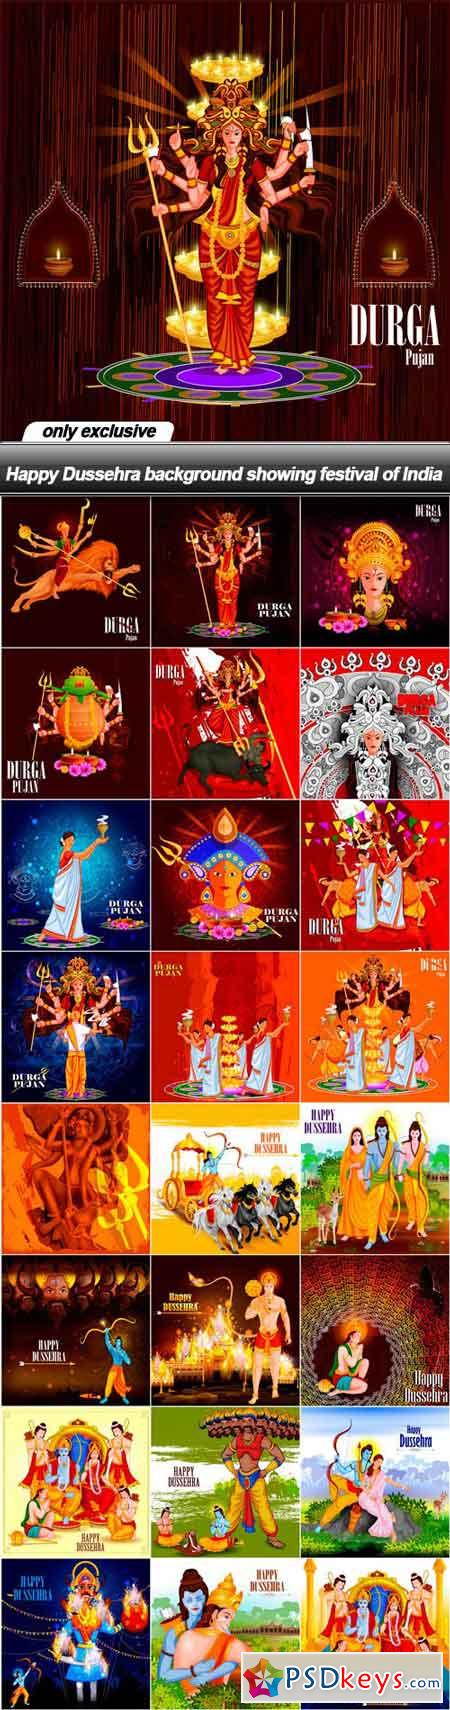 Happy Dussehra background showing festival of India - 25 EPS